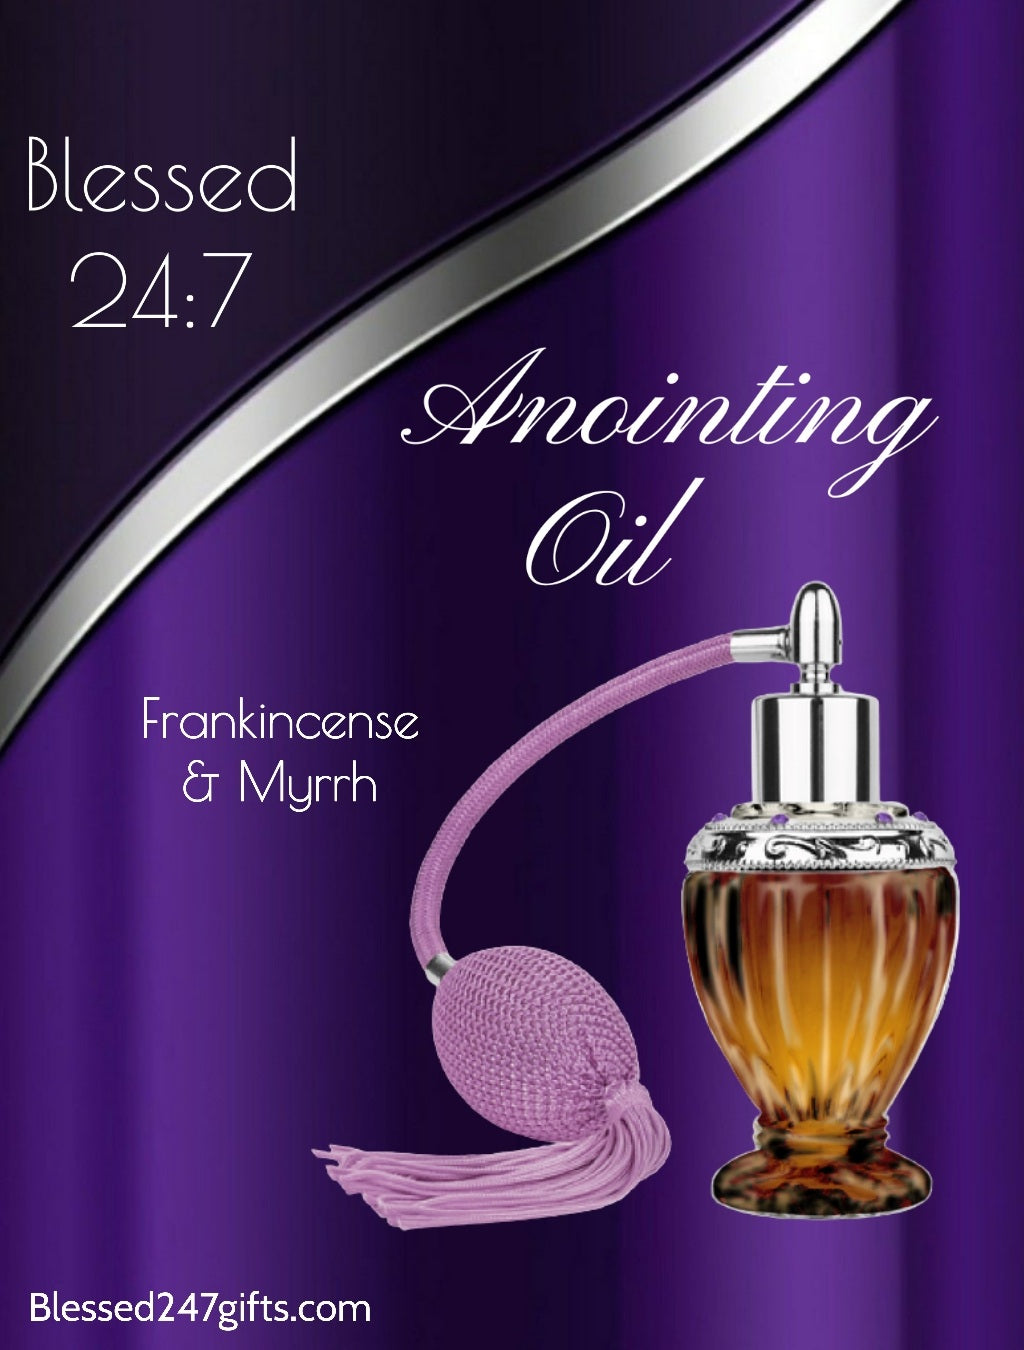 Blessed 24:7 Anointing Oil (Frankincense & Myrrh) inside Antique Style Spray Bottle (Purple) FREE SHIPPING